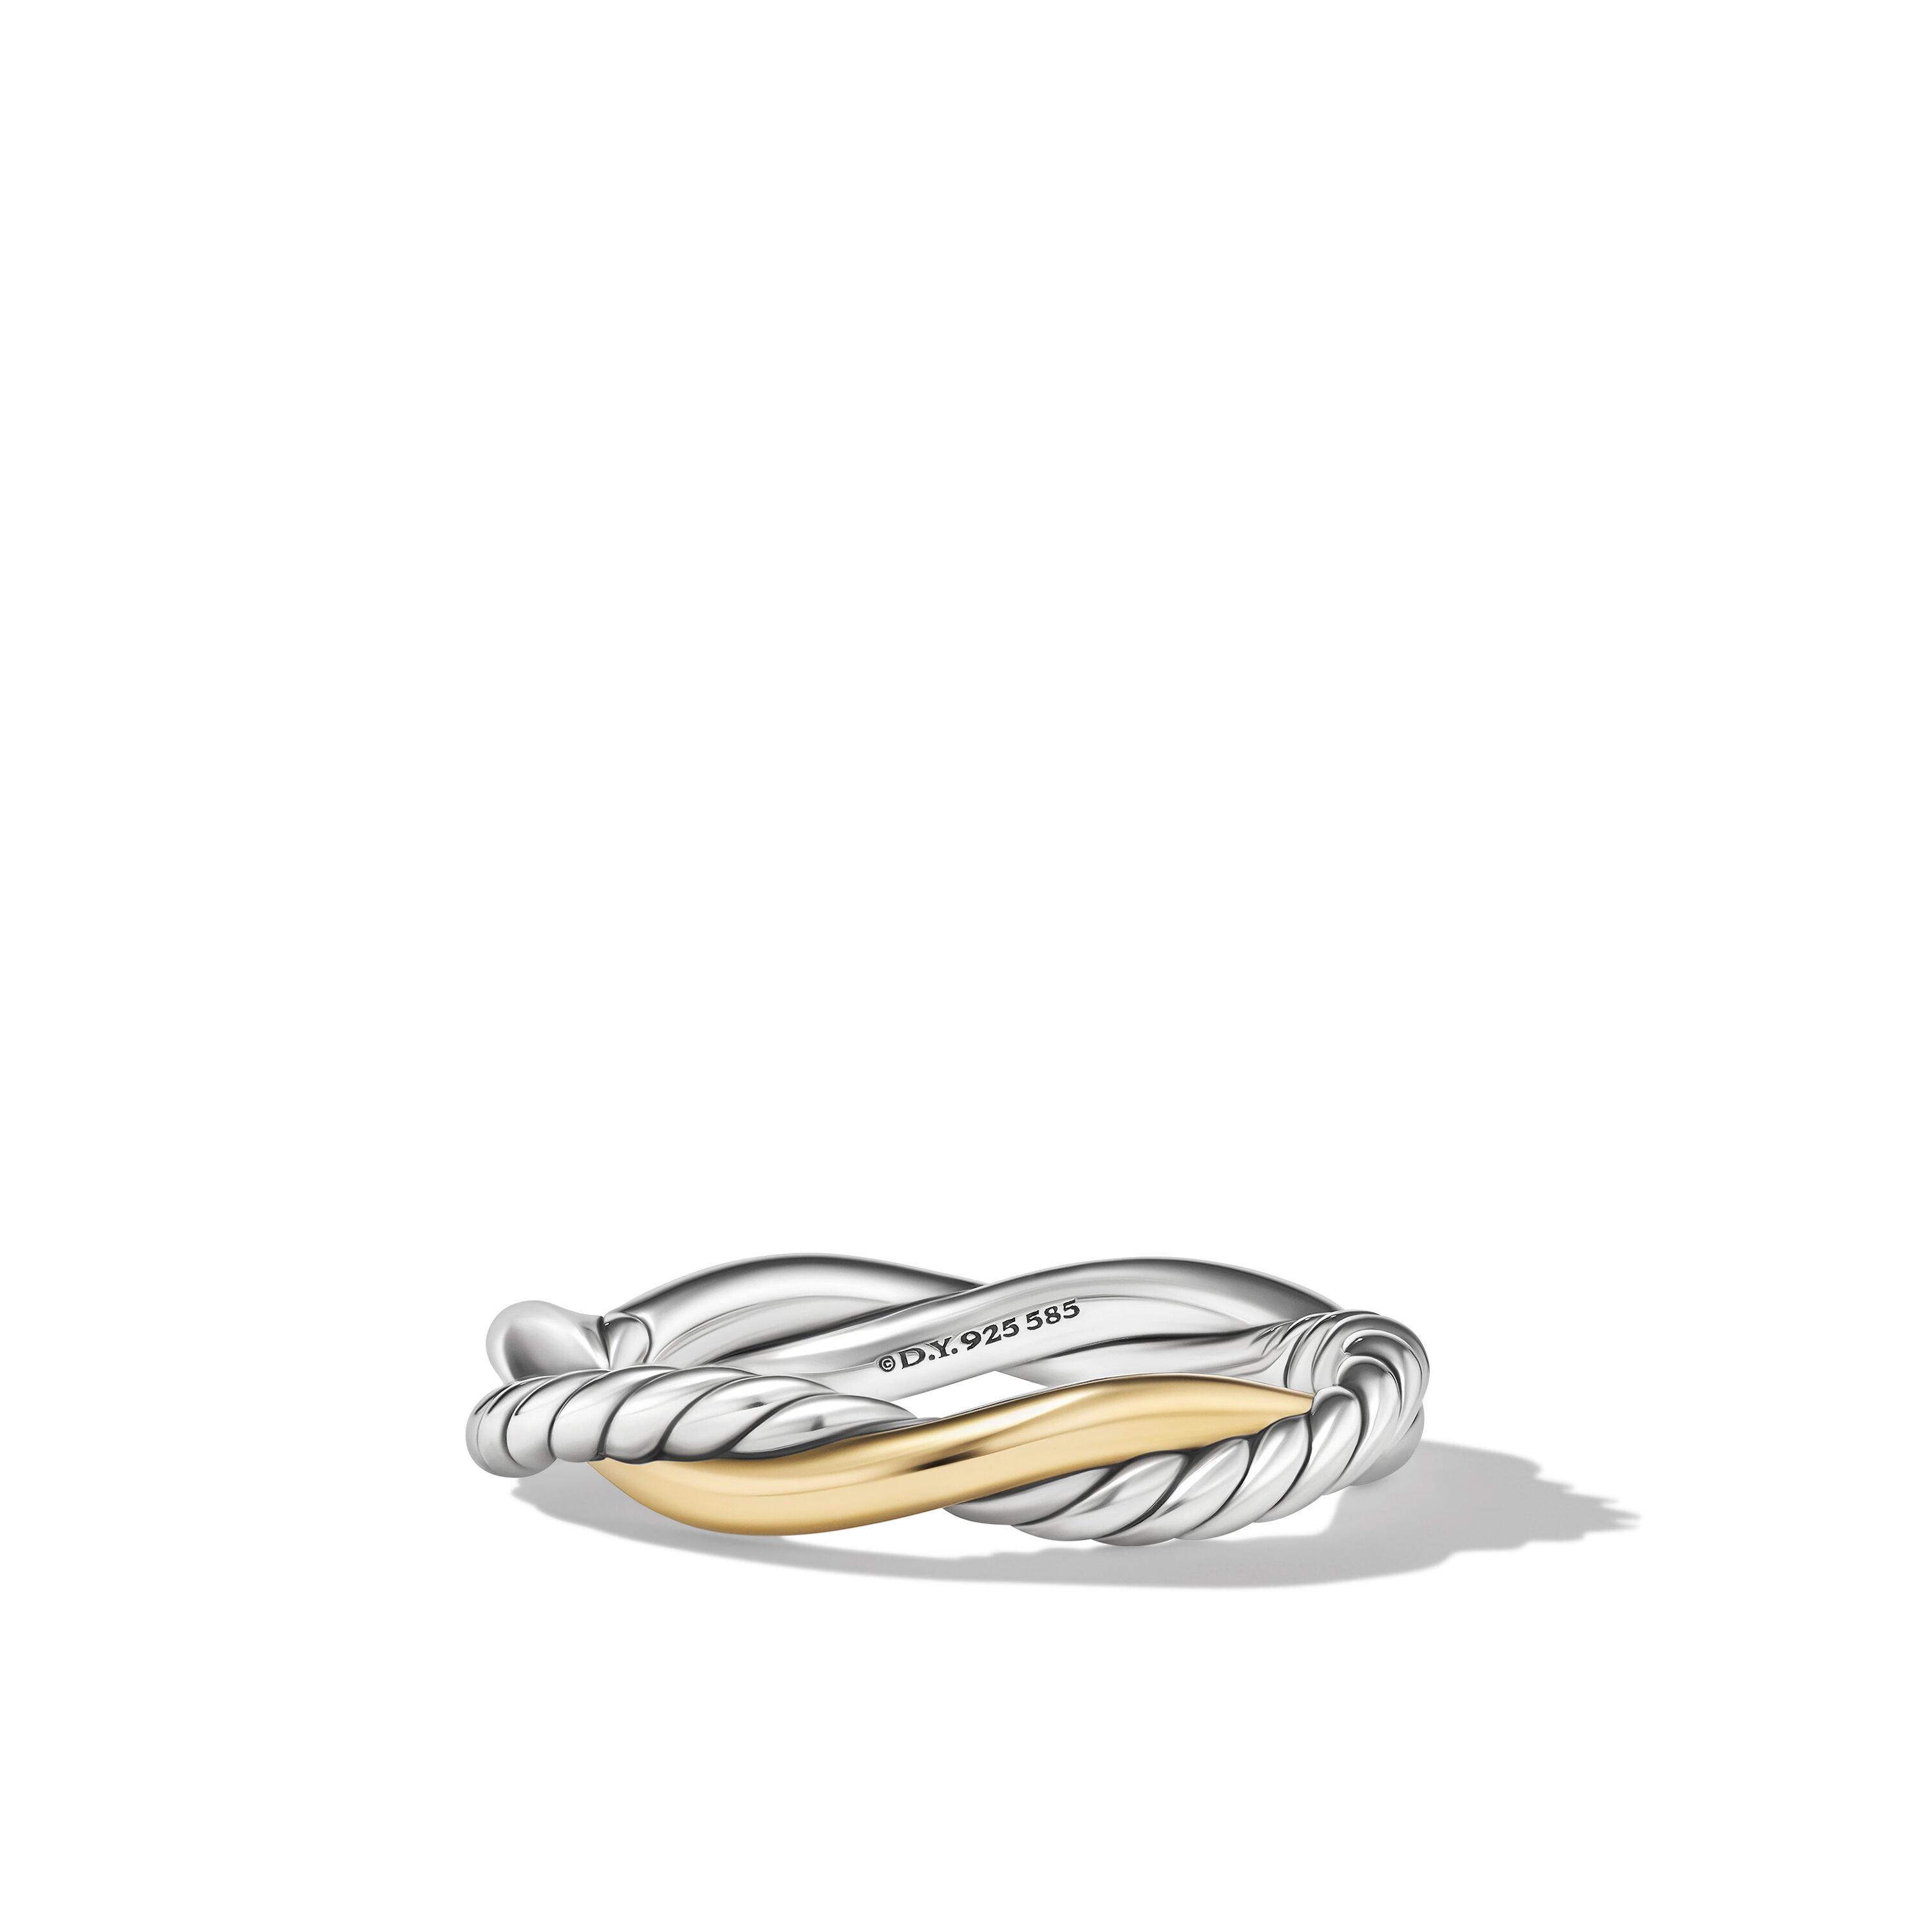 David Yurman Petite Infinity Band Ring in Sterling Silver with Yellow Gold, size 7